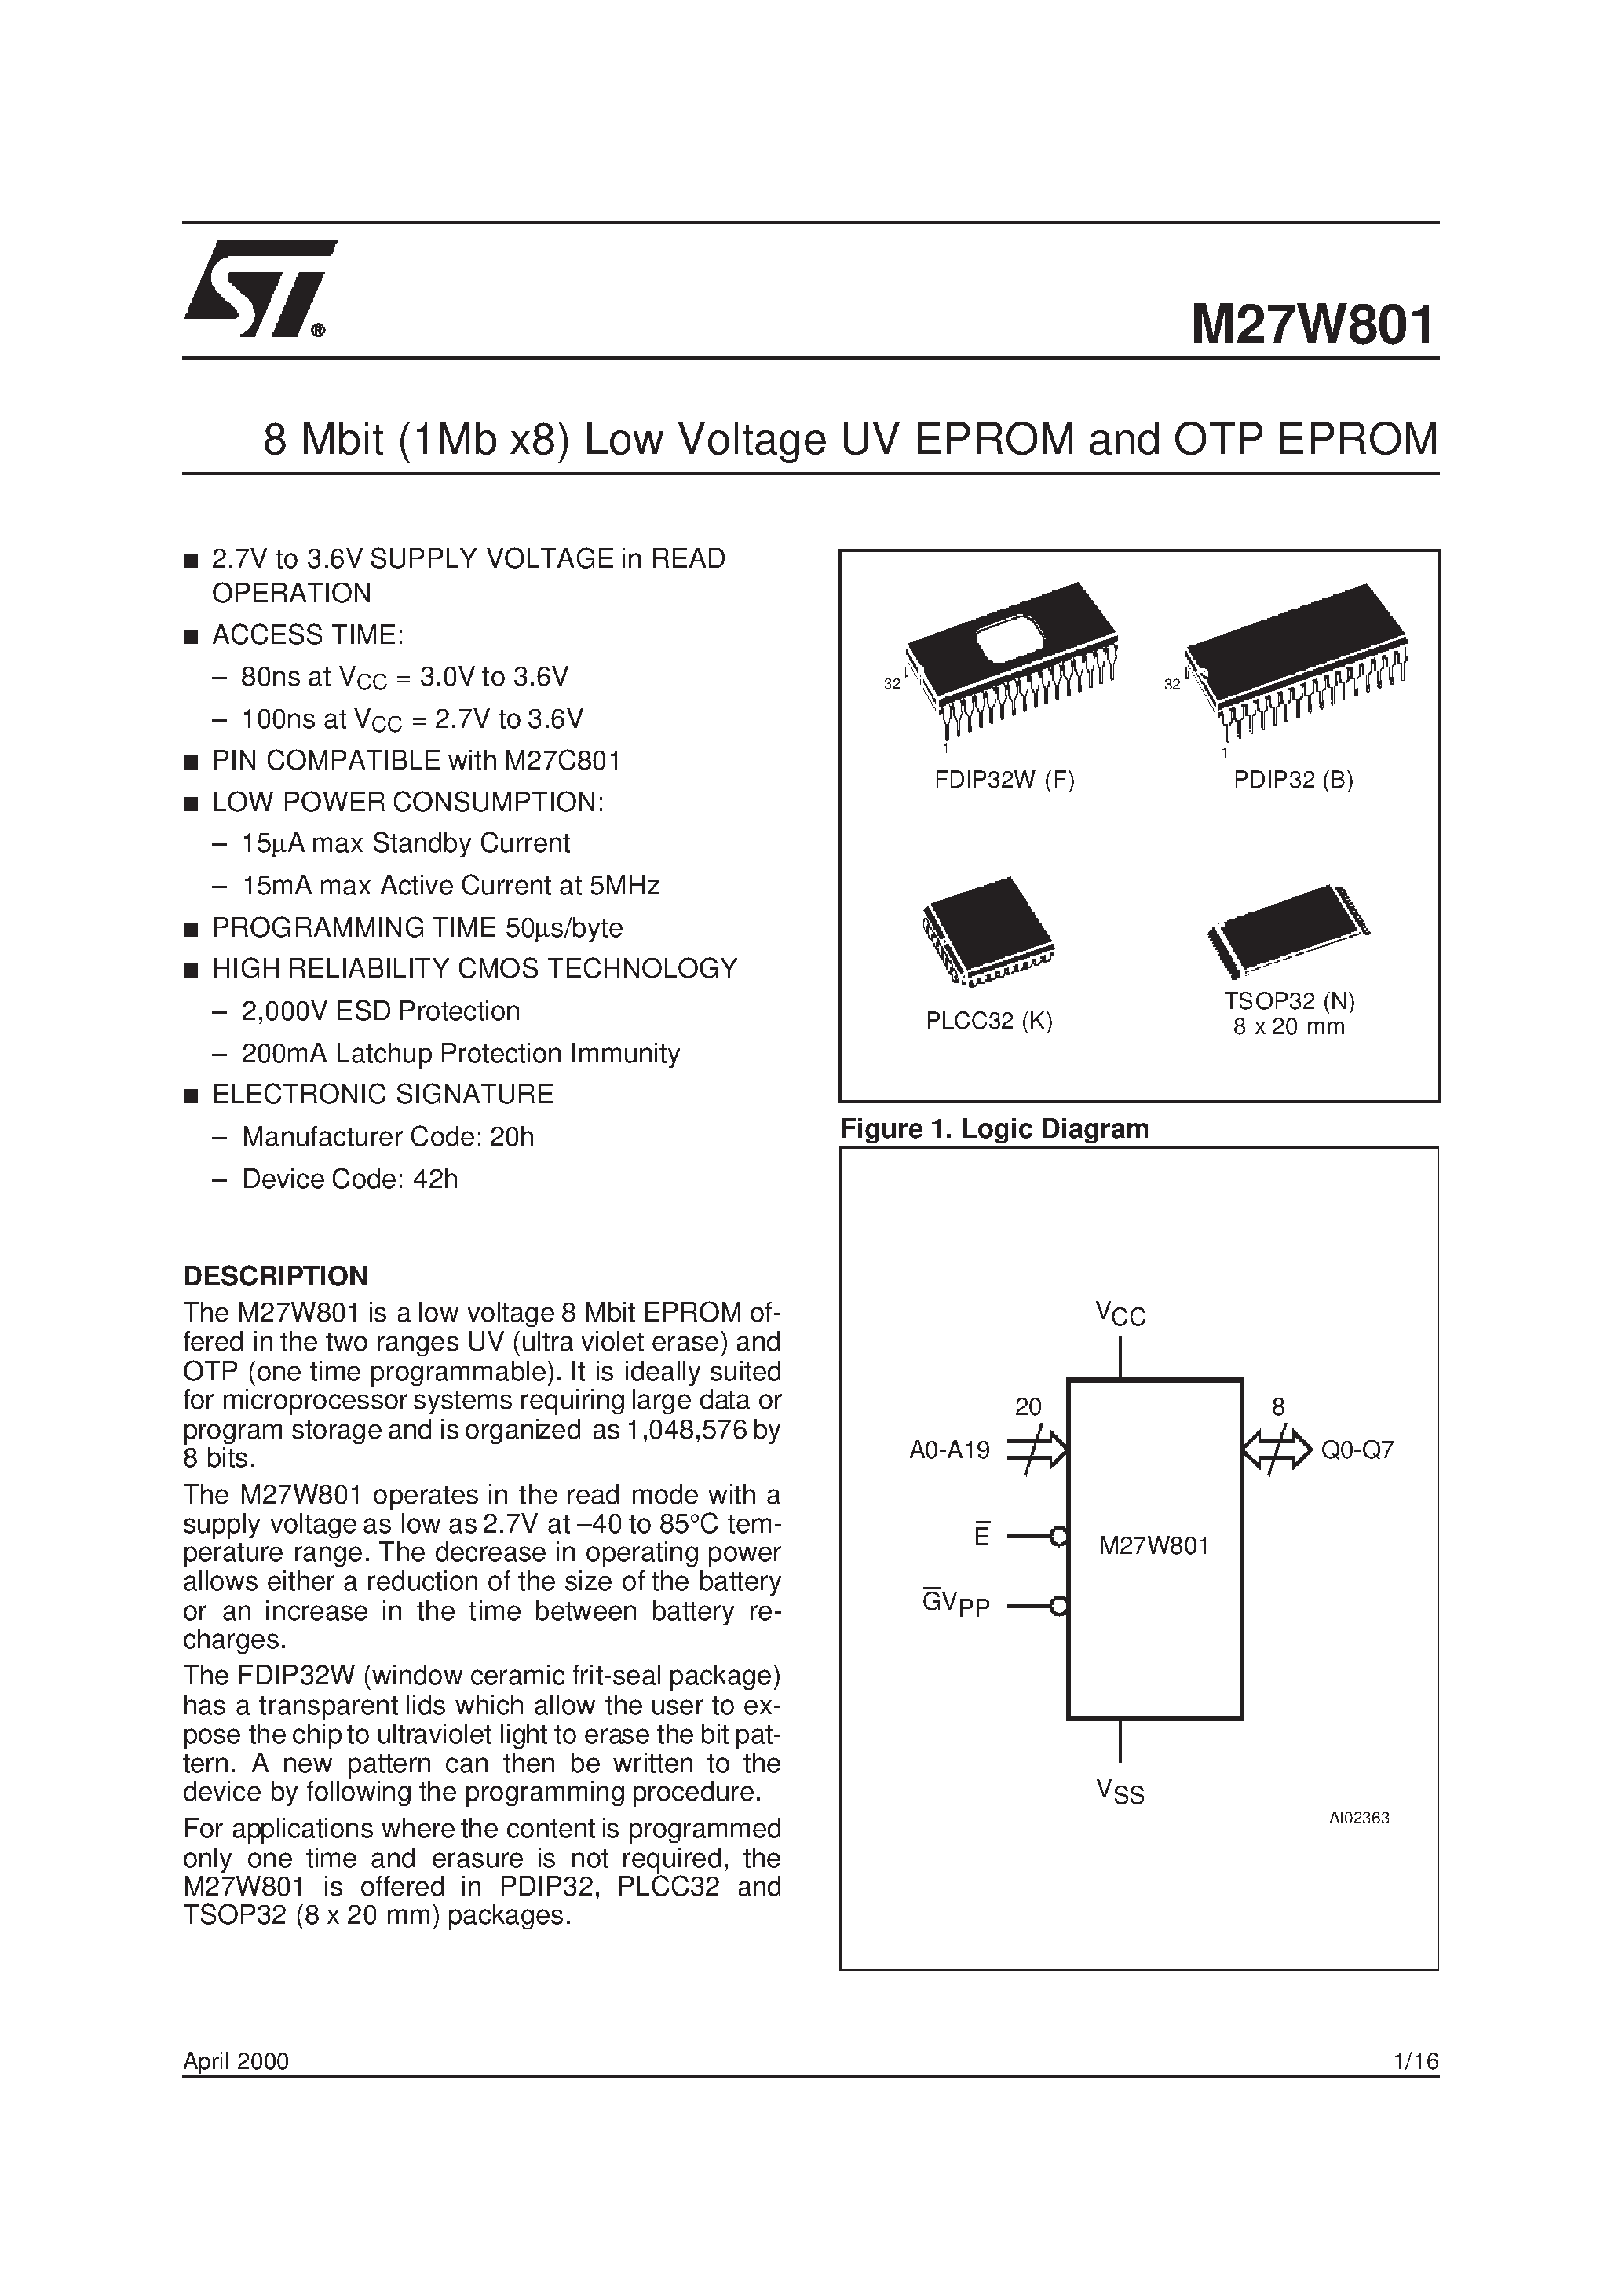 Datasheet M27W801-120N6TR - 8 Mbit 1Mb x8 Low Voltage UV EPROM and OTP EPROM page 1